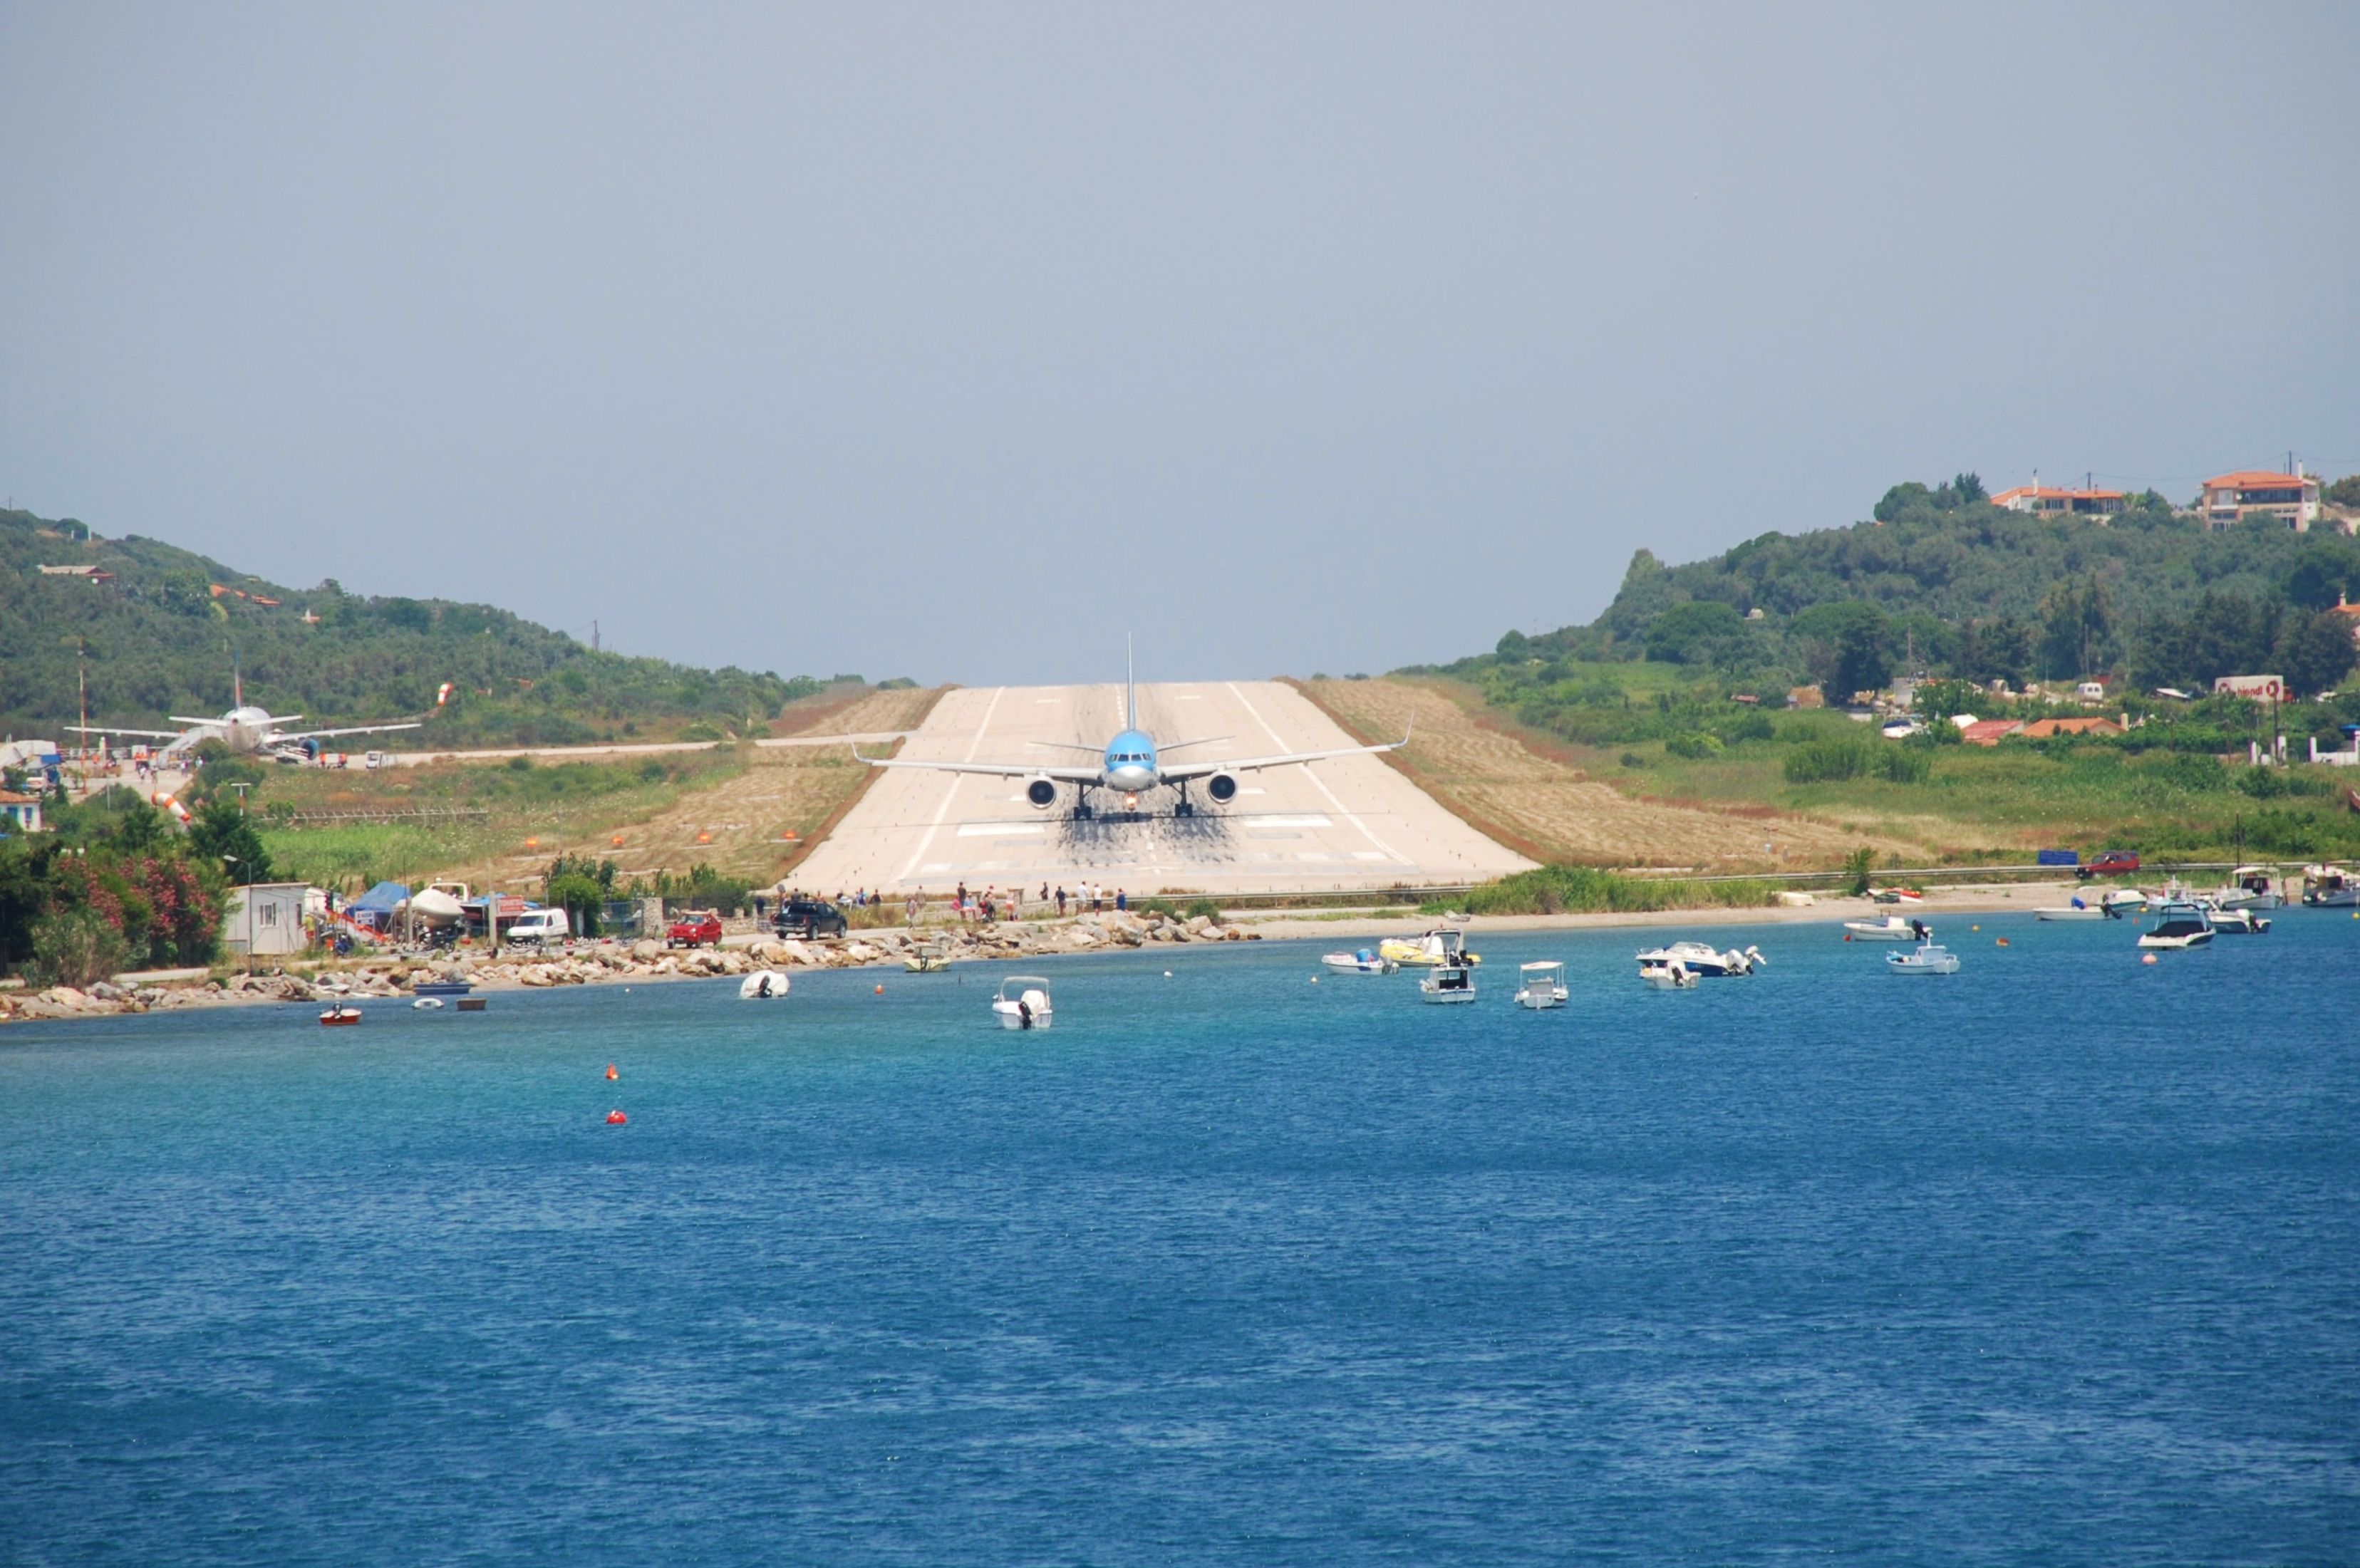 An aircraft on The Runway In Skiathos.